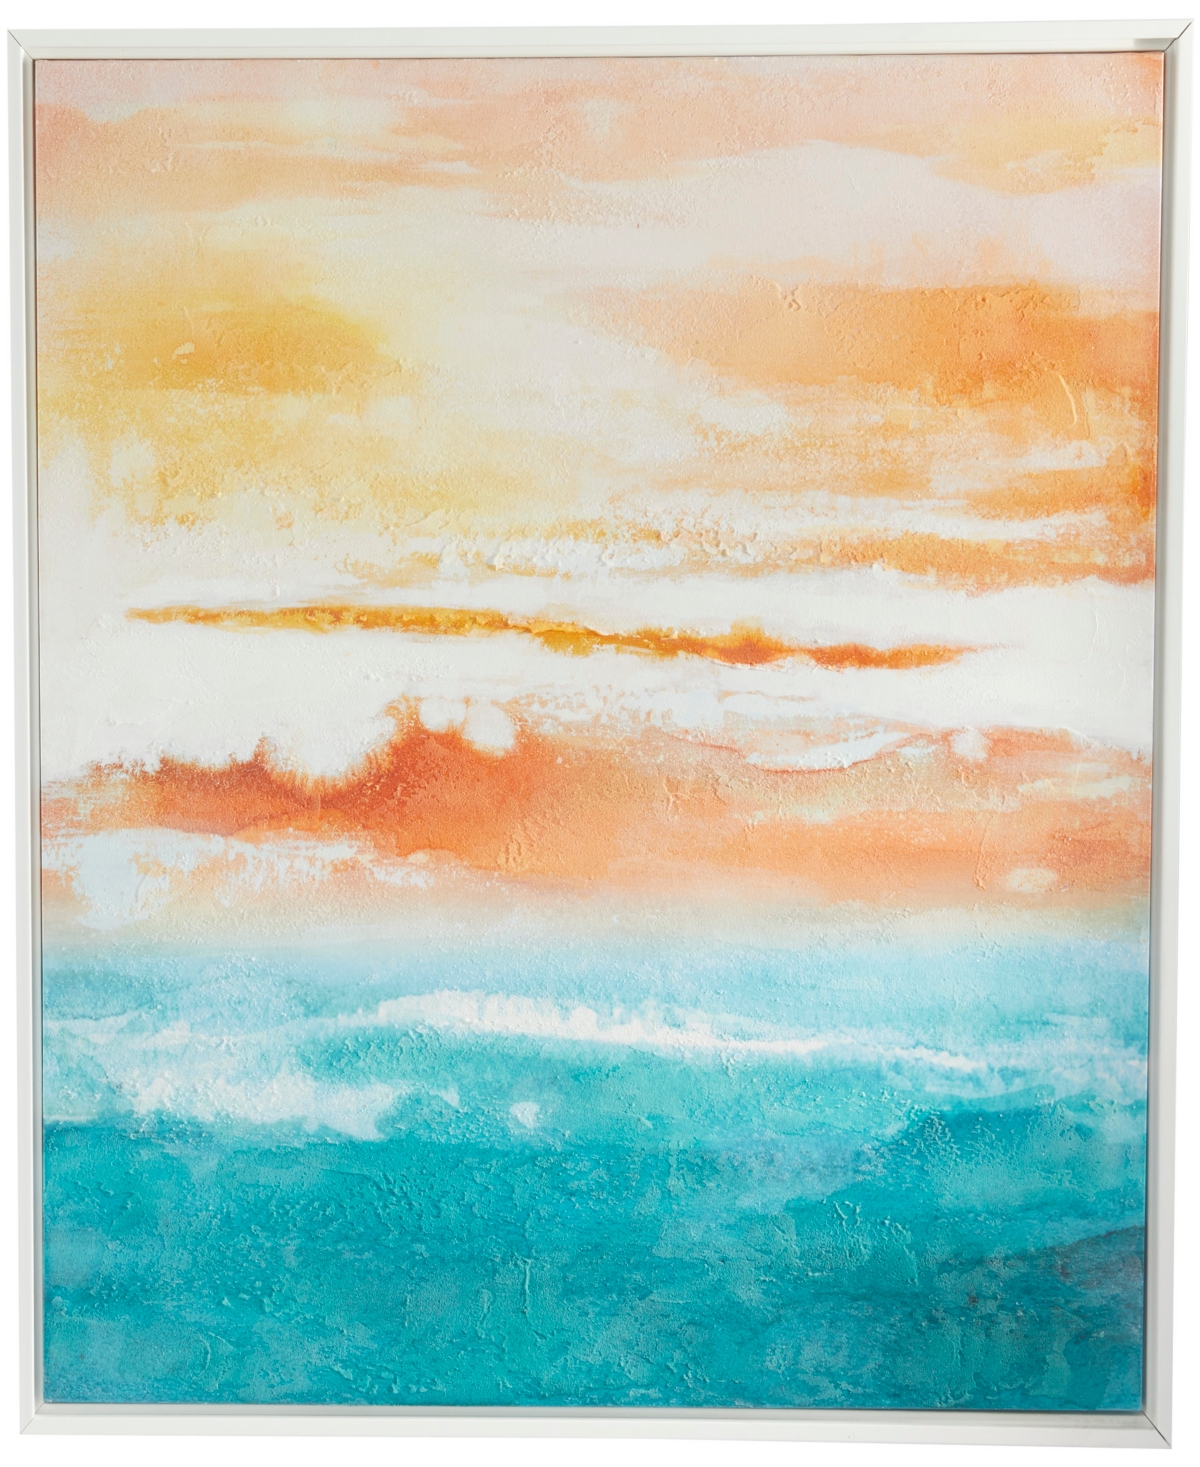 Rosemary Lane Canvas Abstract Sunset Landscape Framed Wall Art With White Frame, 37" X 1" X 37" In Multi Colored